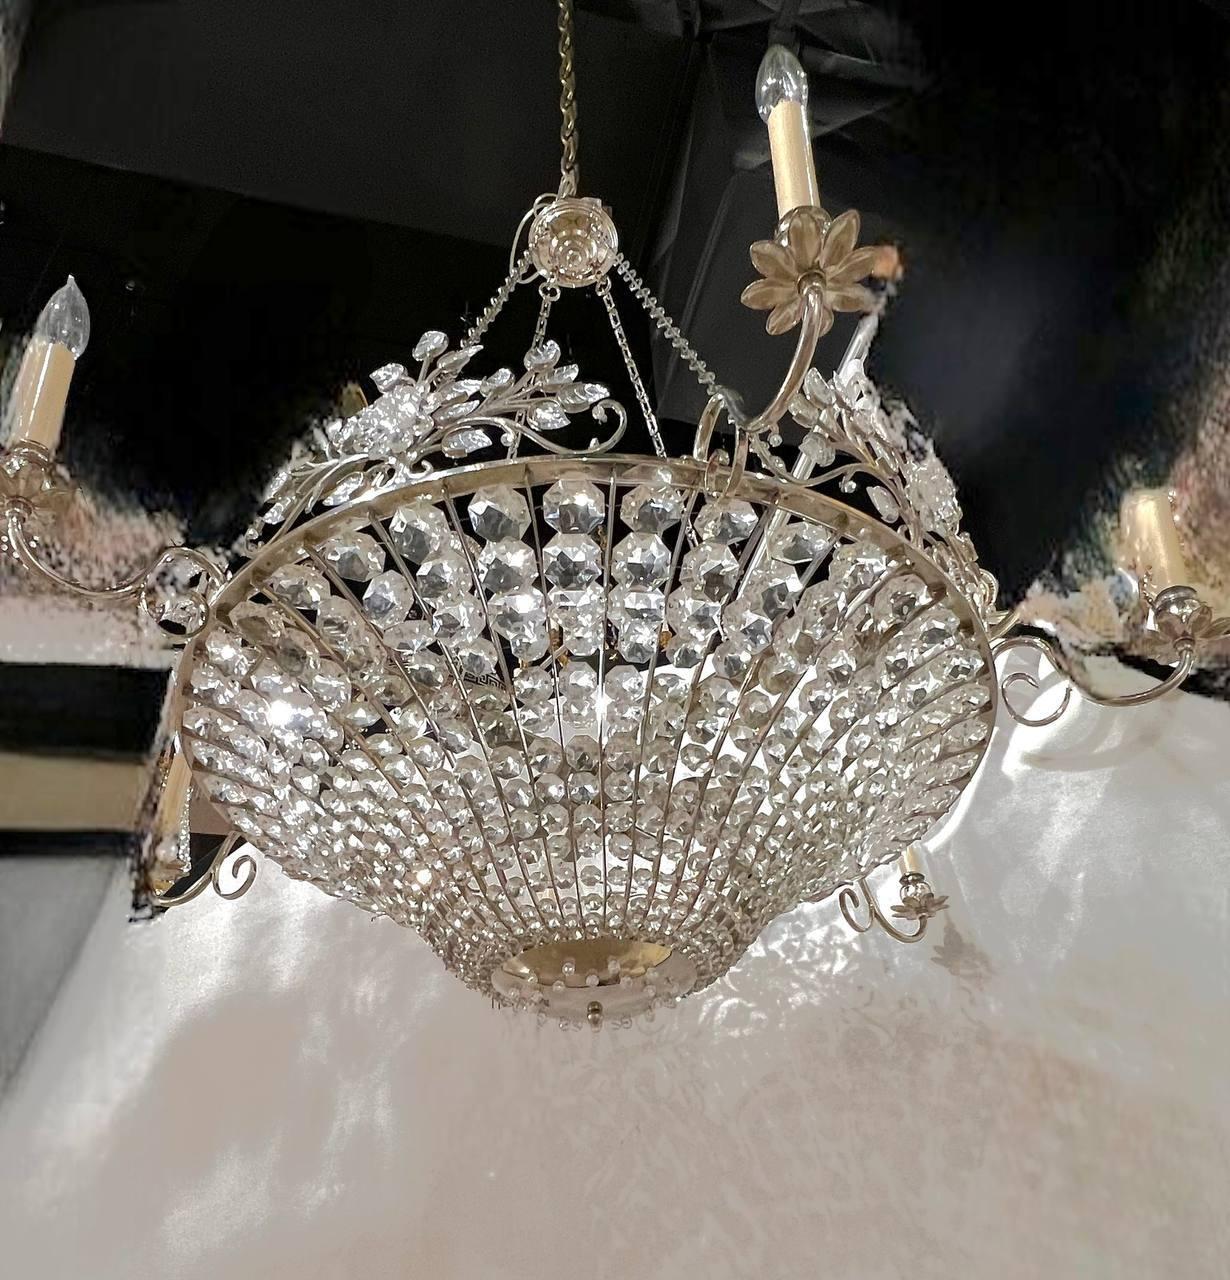 French Provincial 1930's French Silver Plated Crystals Chandelier with 12 Lights For Sale